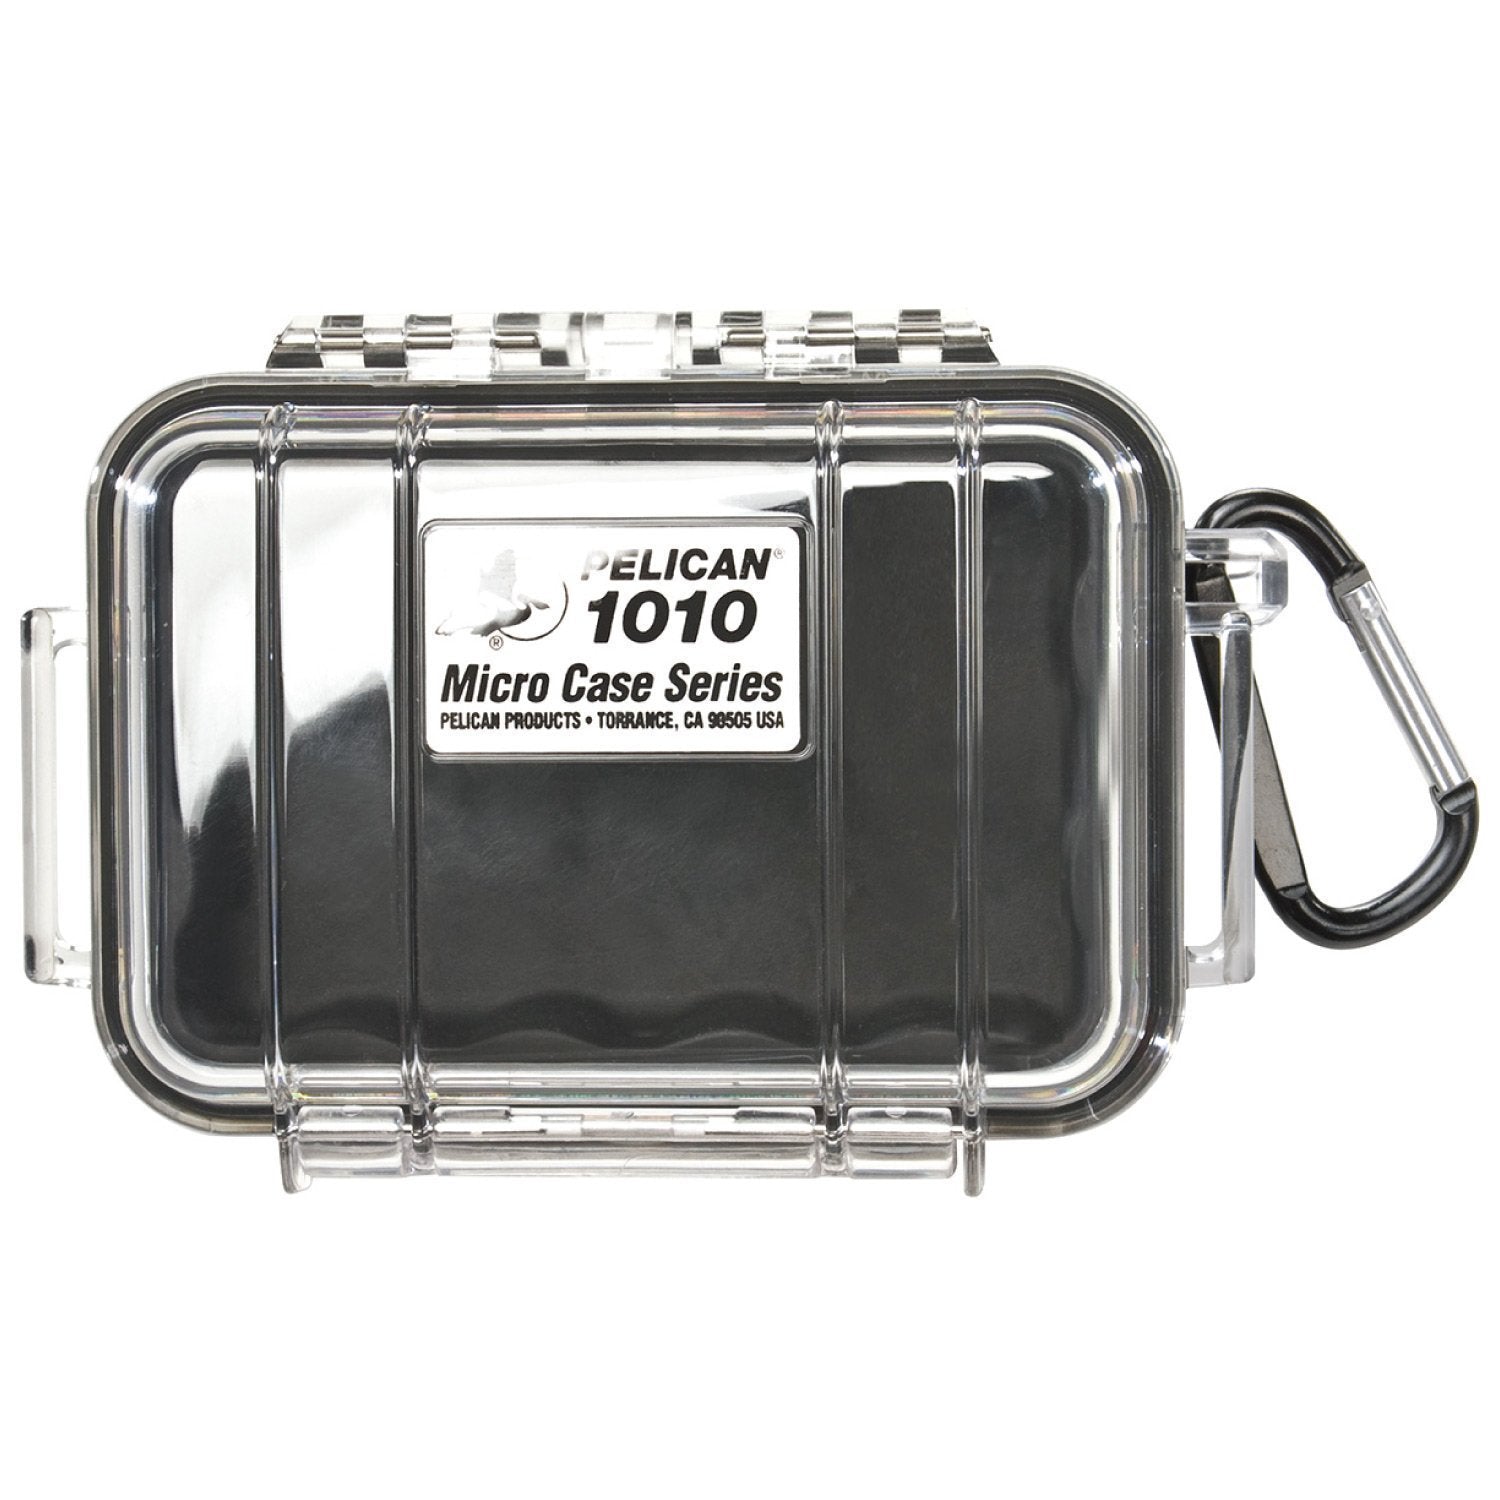 Pelican 1010 Micro Case Cases Pelican Products Clear Shell with Black Liner Tactical Gear Supplier Tactical Distributors Australia